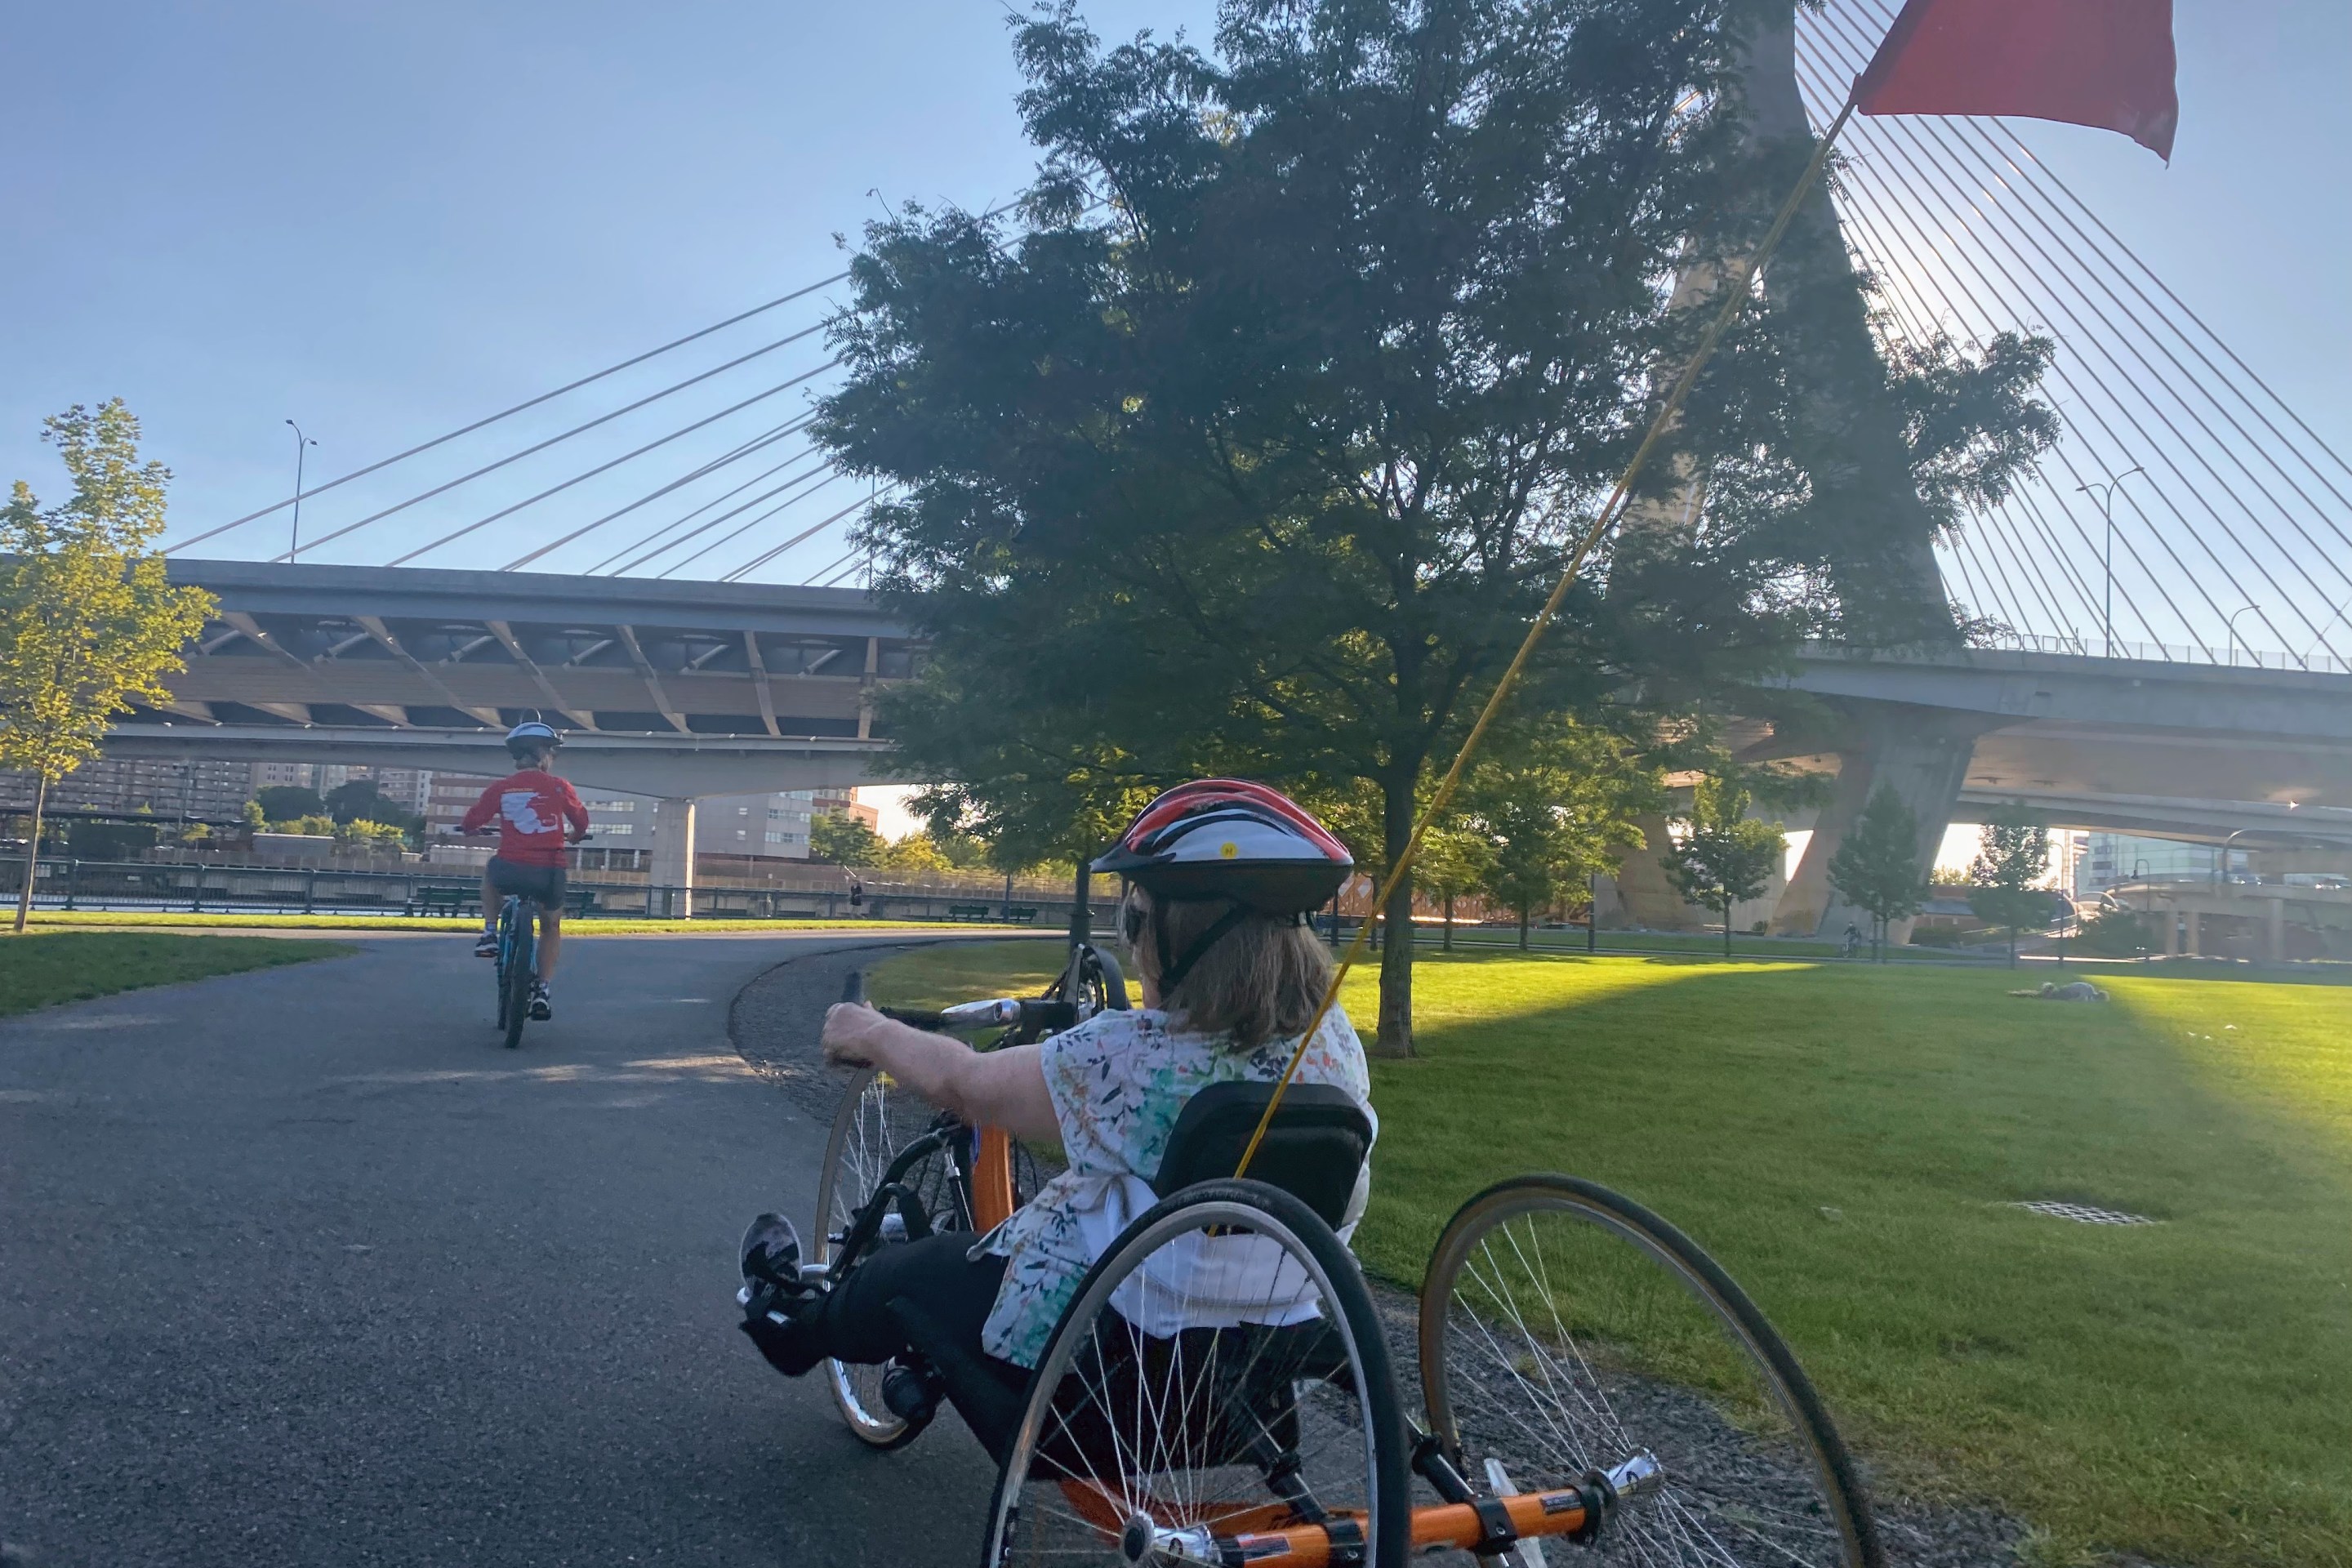 Pam Daly rides an orange recumbent bike with two wheels in the back and one in the front as she approaches the Zakim bridge with the sun behind it